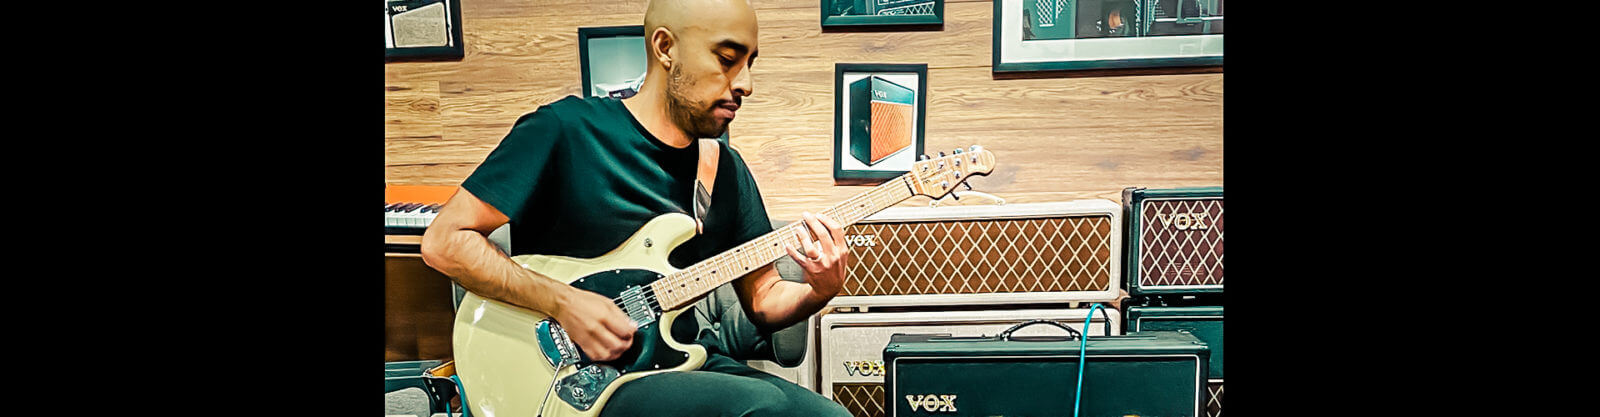 male musician playing electric guitar in front of VOX amplifiers